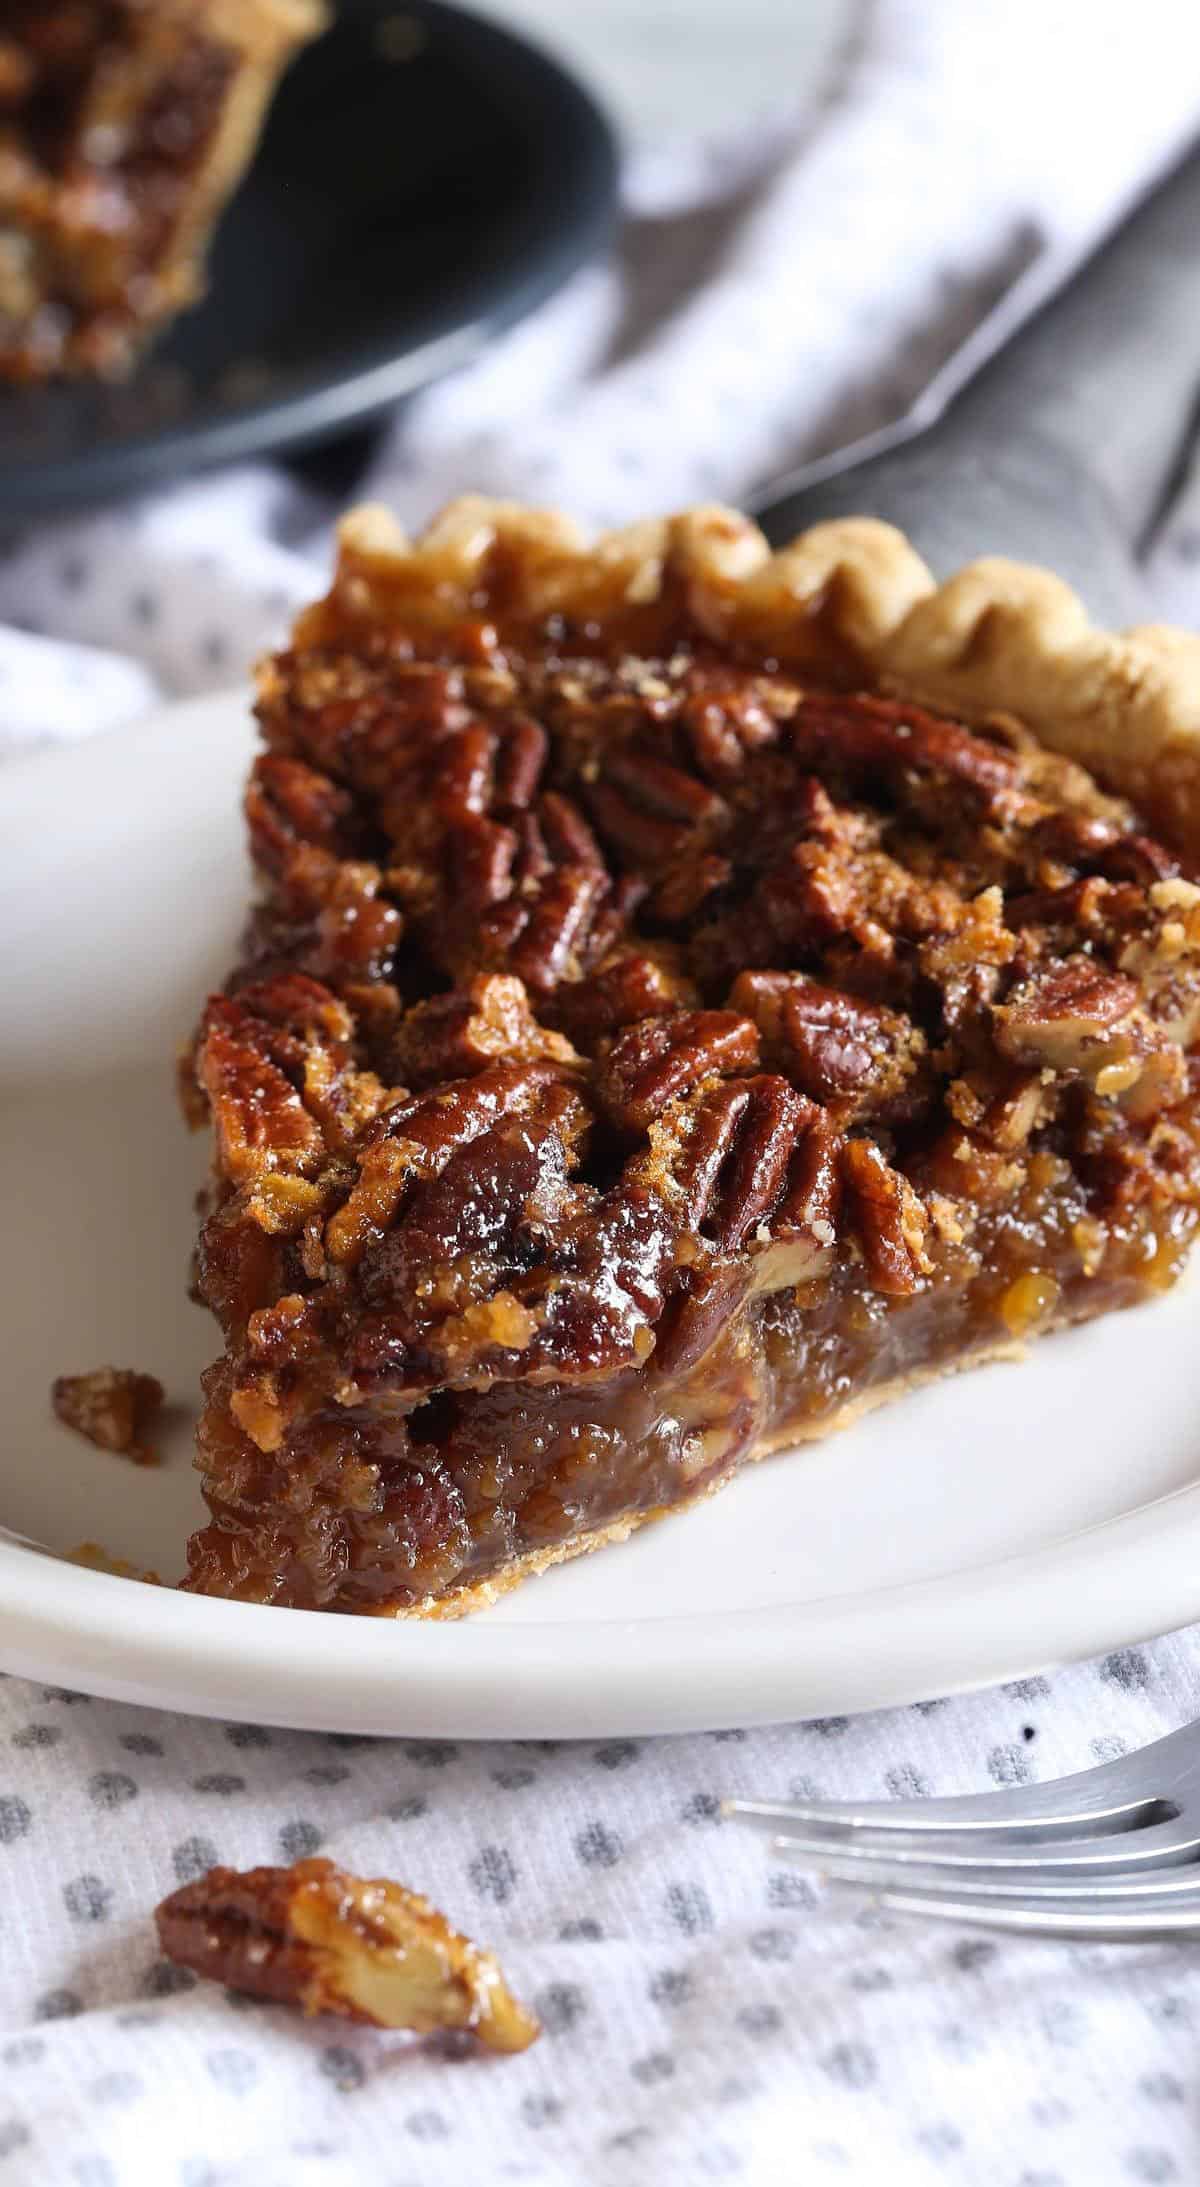  Behold the heavenly pecan pie, the perfect balance of crunchy and gooey!